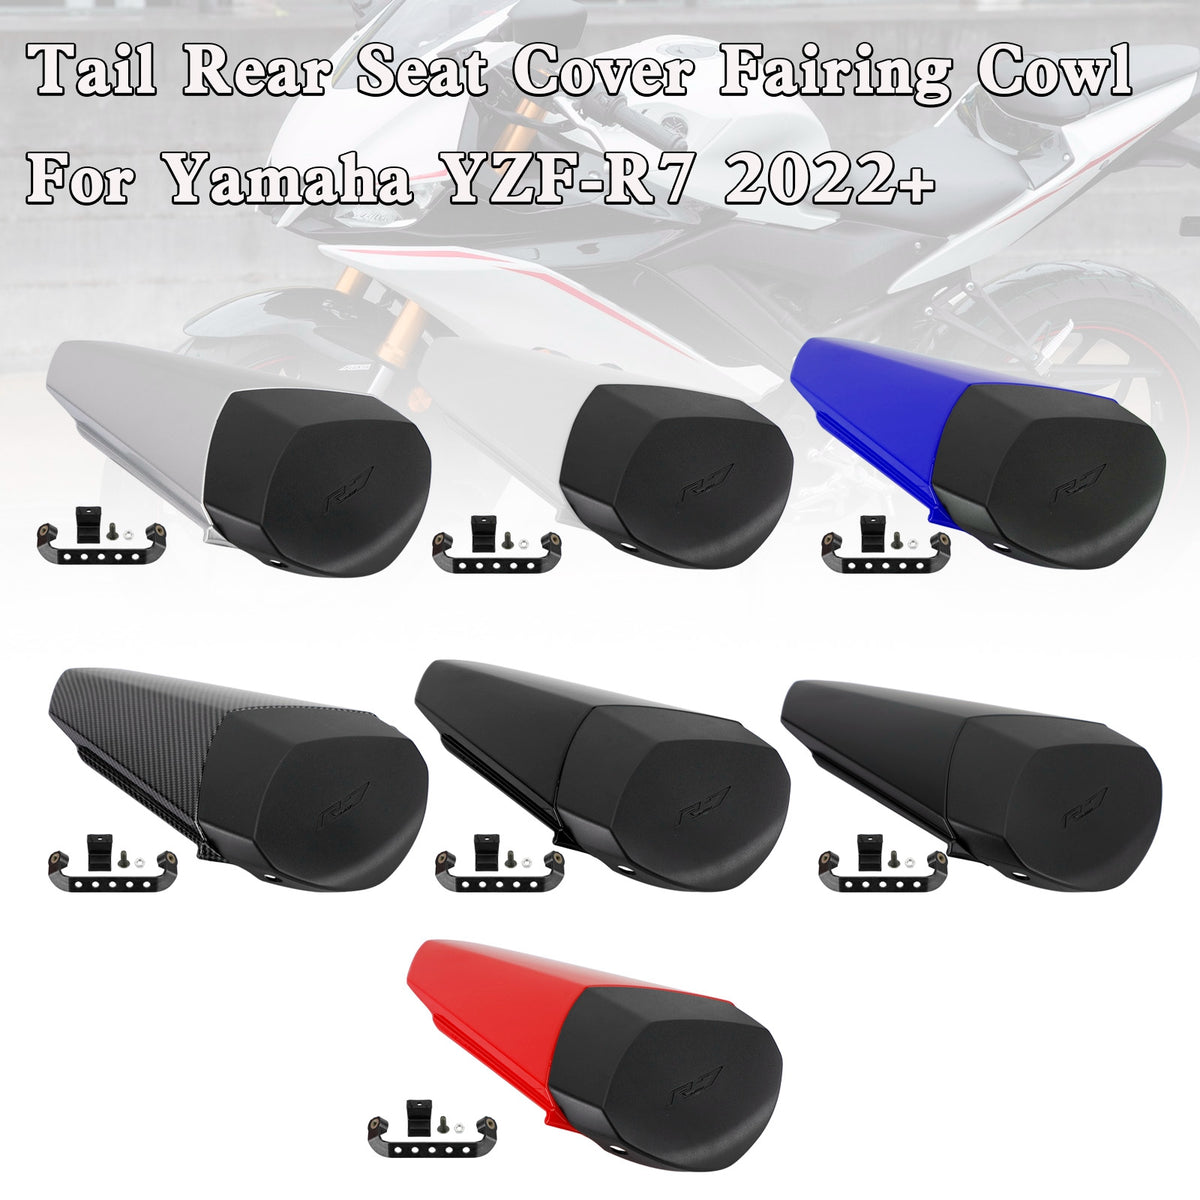 Tail Rear Seat Cover Fairing Cowl For YAMAHA YZF-R7 YZF R7 2022